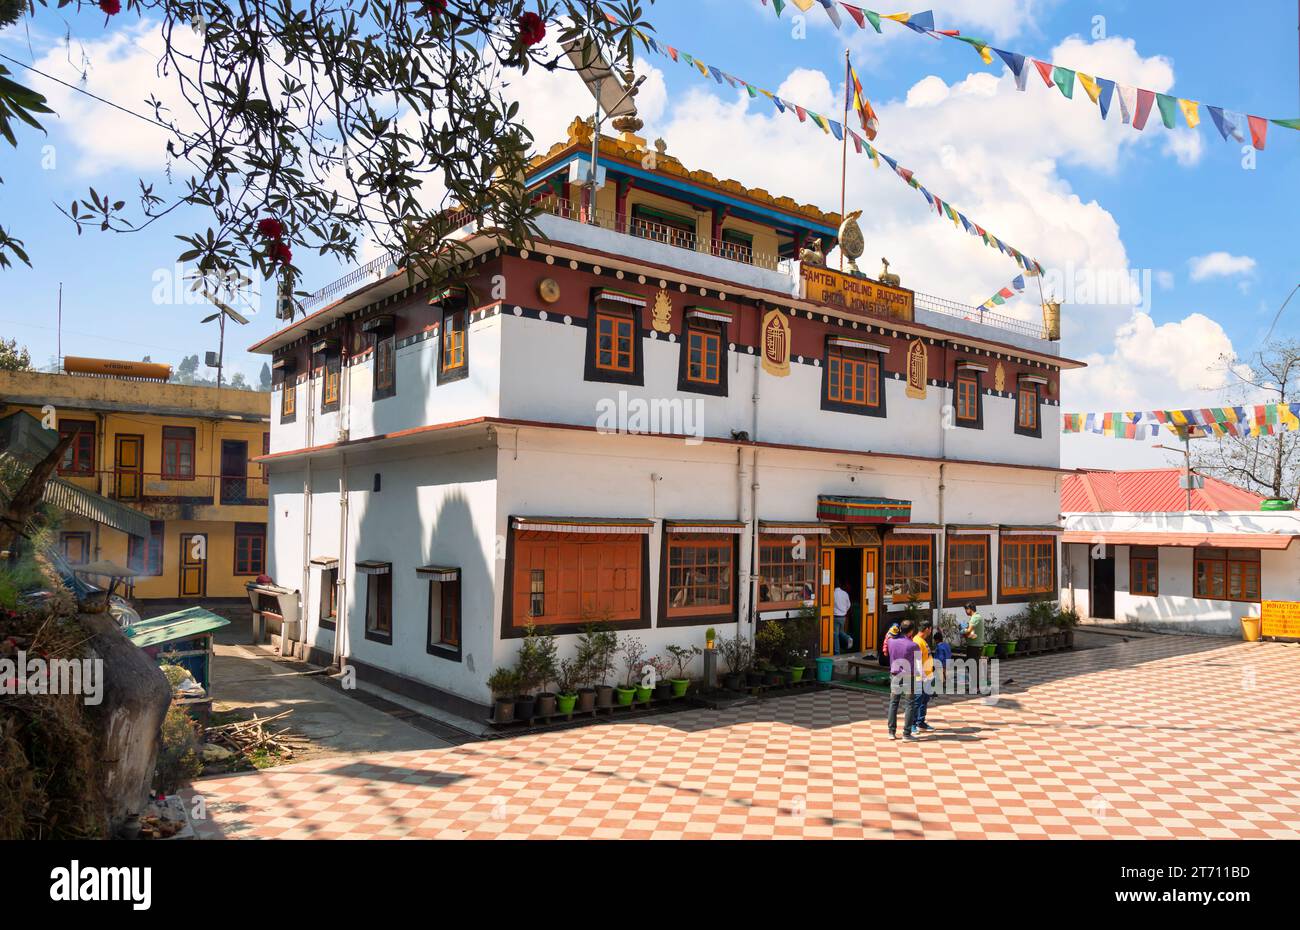 The famous Ghum monastery constructed in 1875 at Darjeeling hill station in West Bengal. India Stock Photo